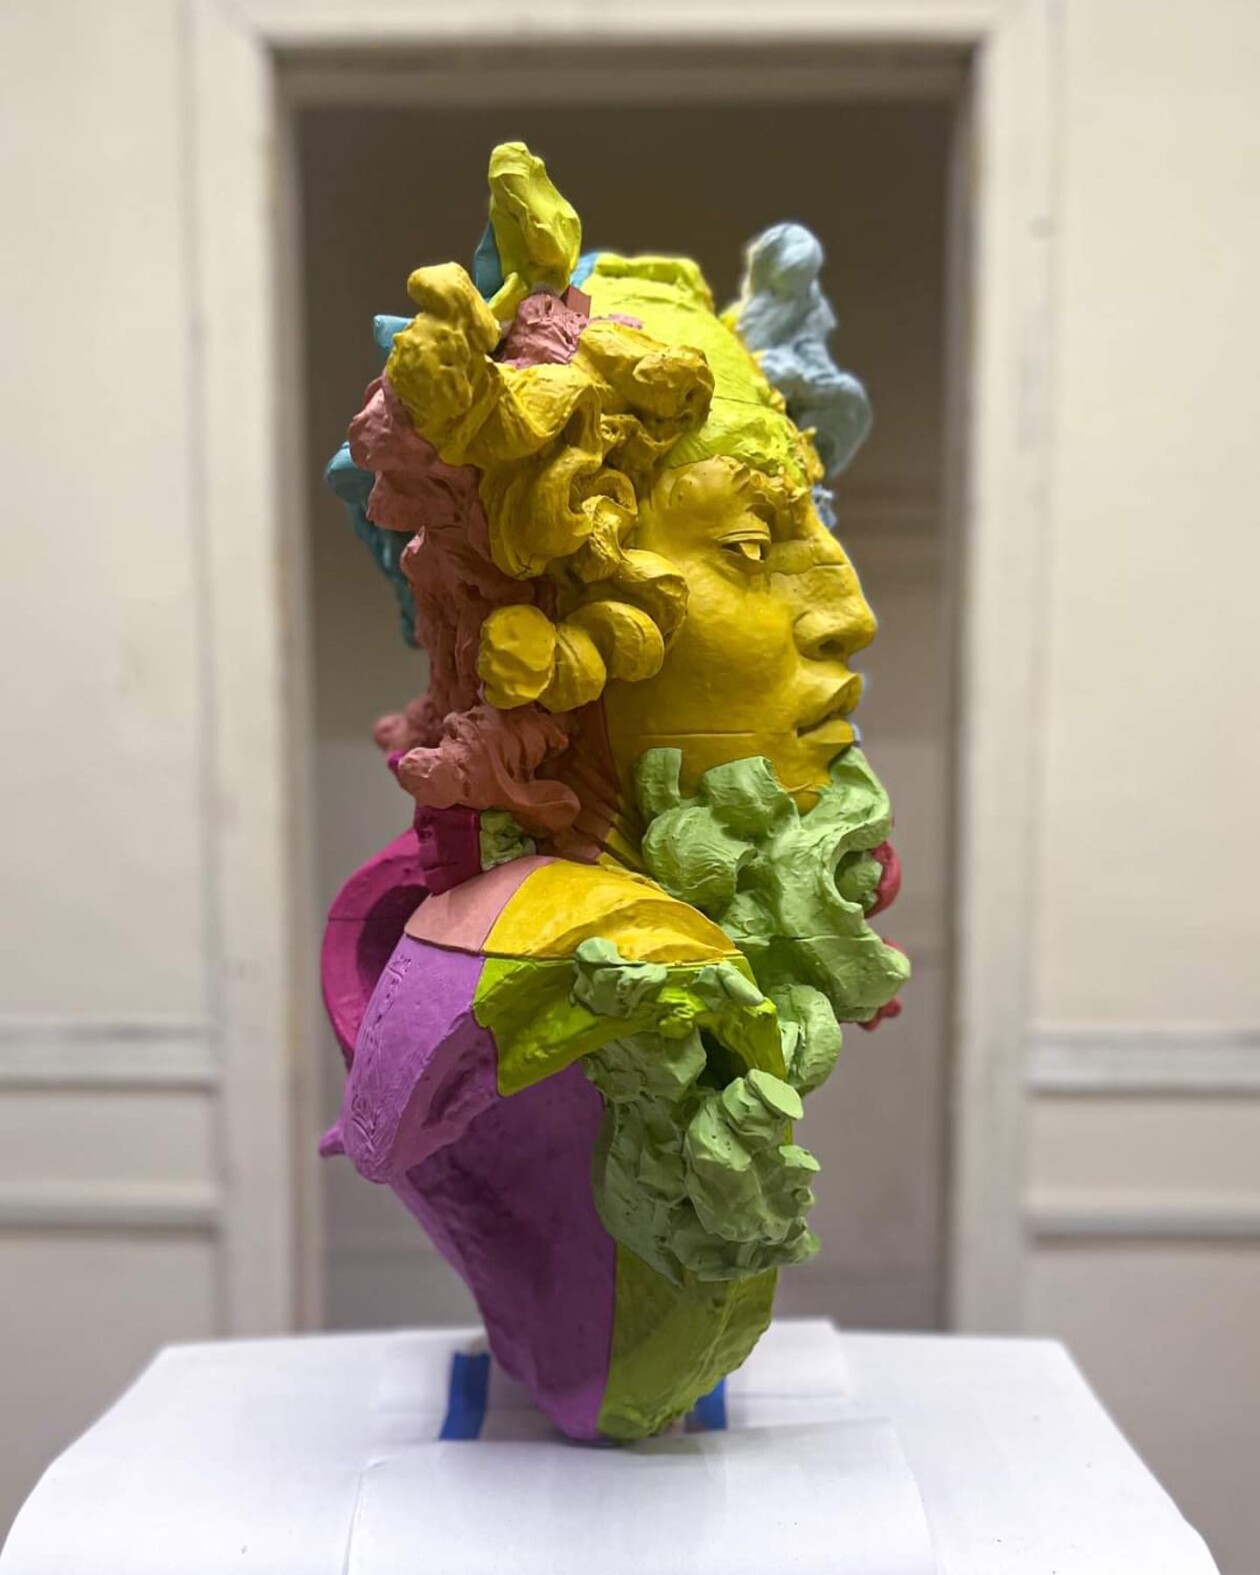 Multicolored 3d Printed Sculptures By Javier Marin (10)